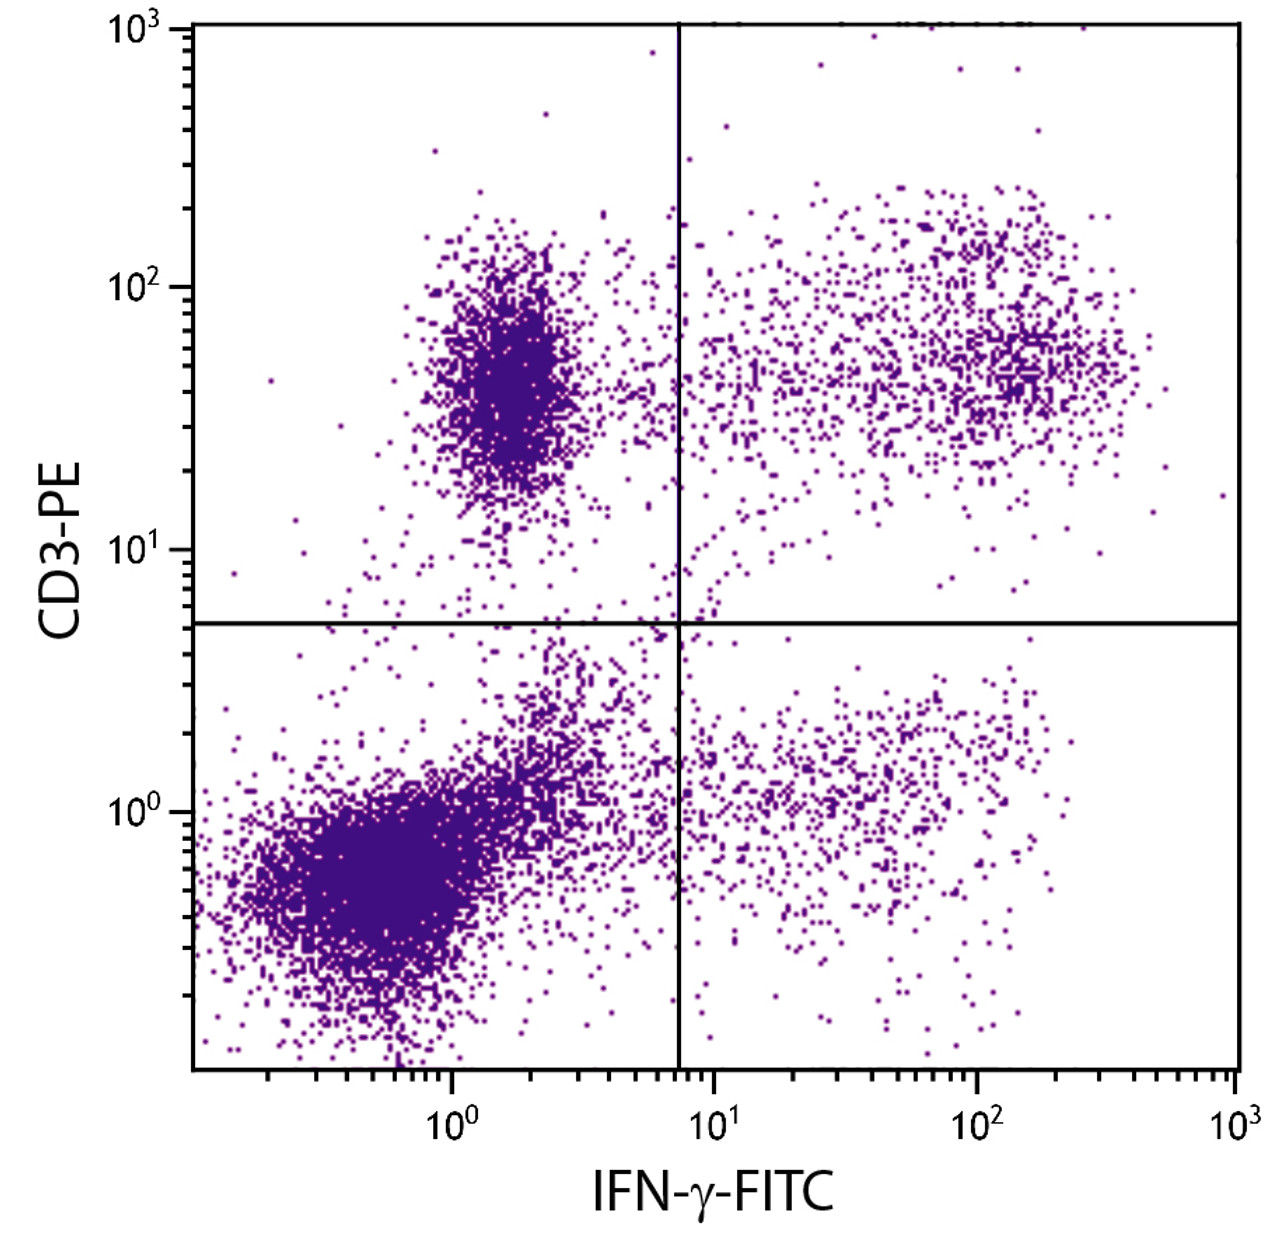 PMA and Ionomycin-stimulated human peripheral blood lymphocytes were intracellularly stained with Mouse Anti-Human IFN-?-FITC (Cat. No. 99-645) and Mouse Anti-Human CD3-PE .